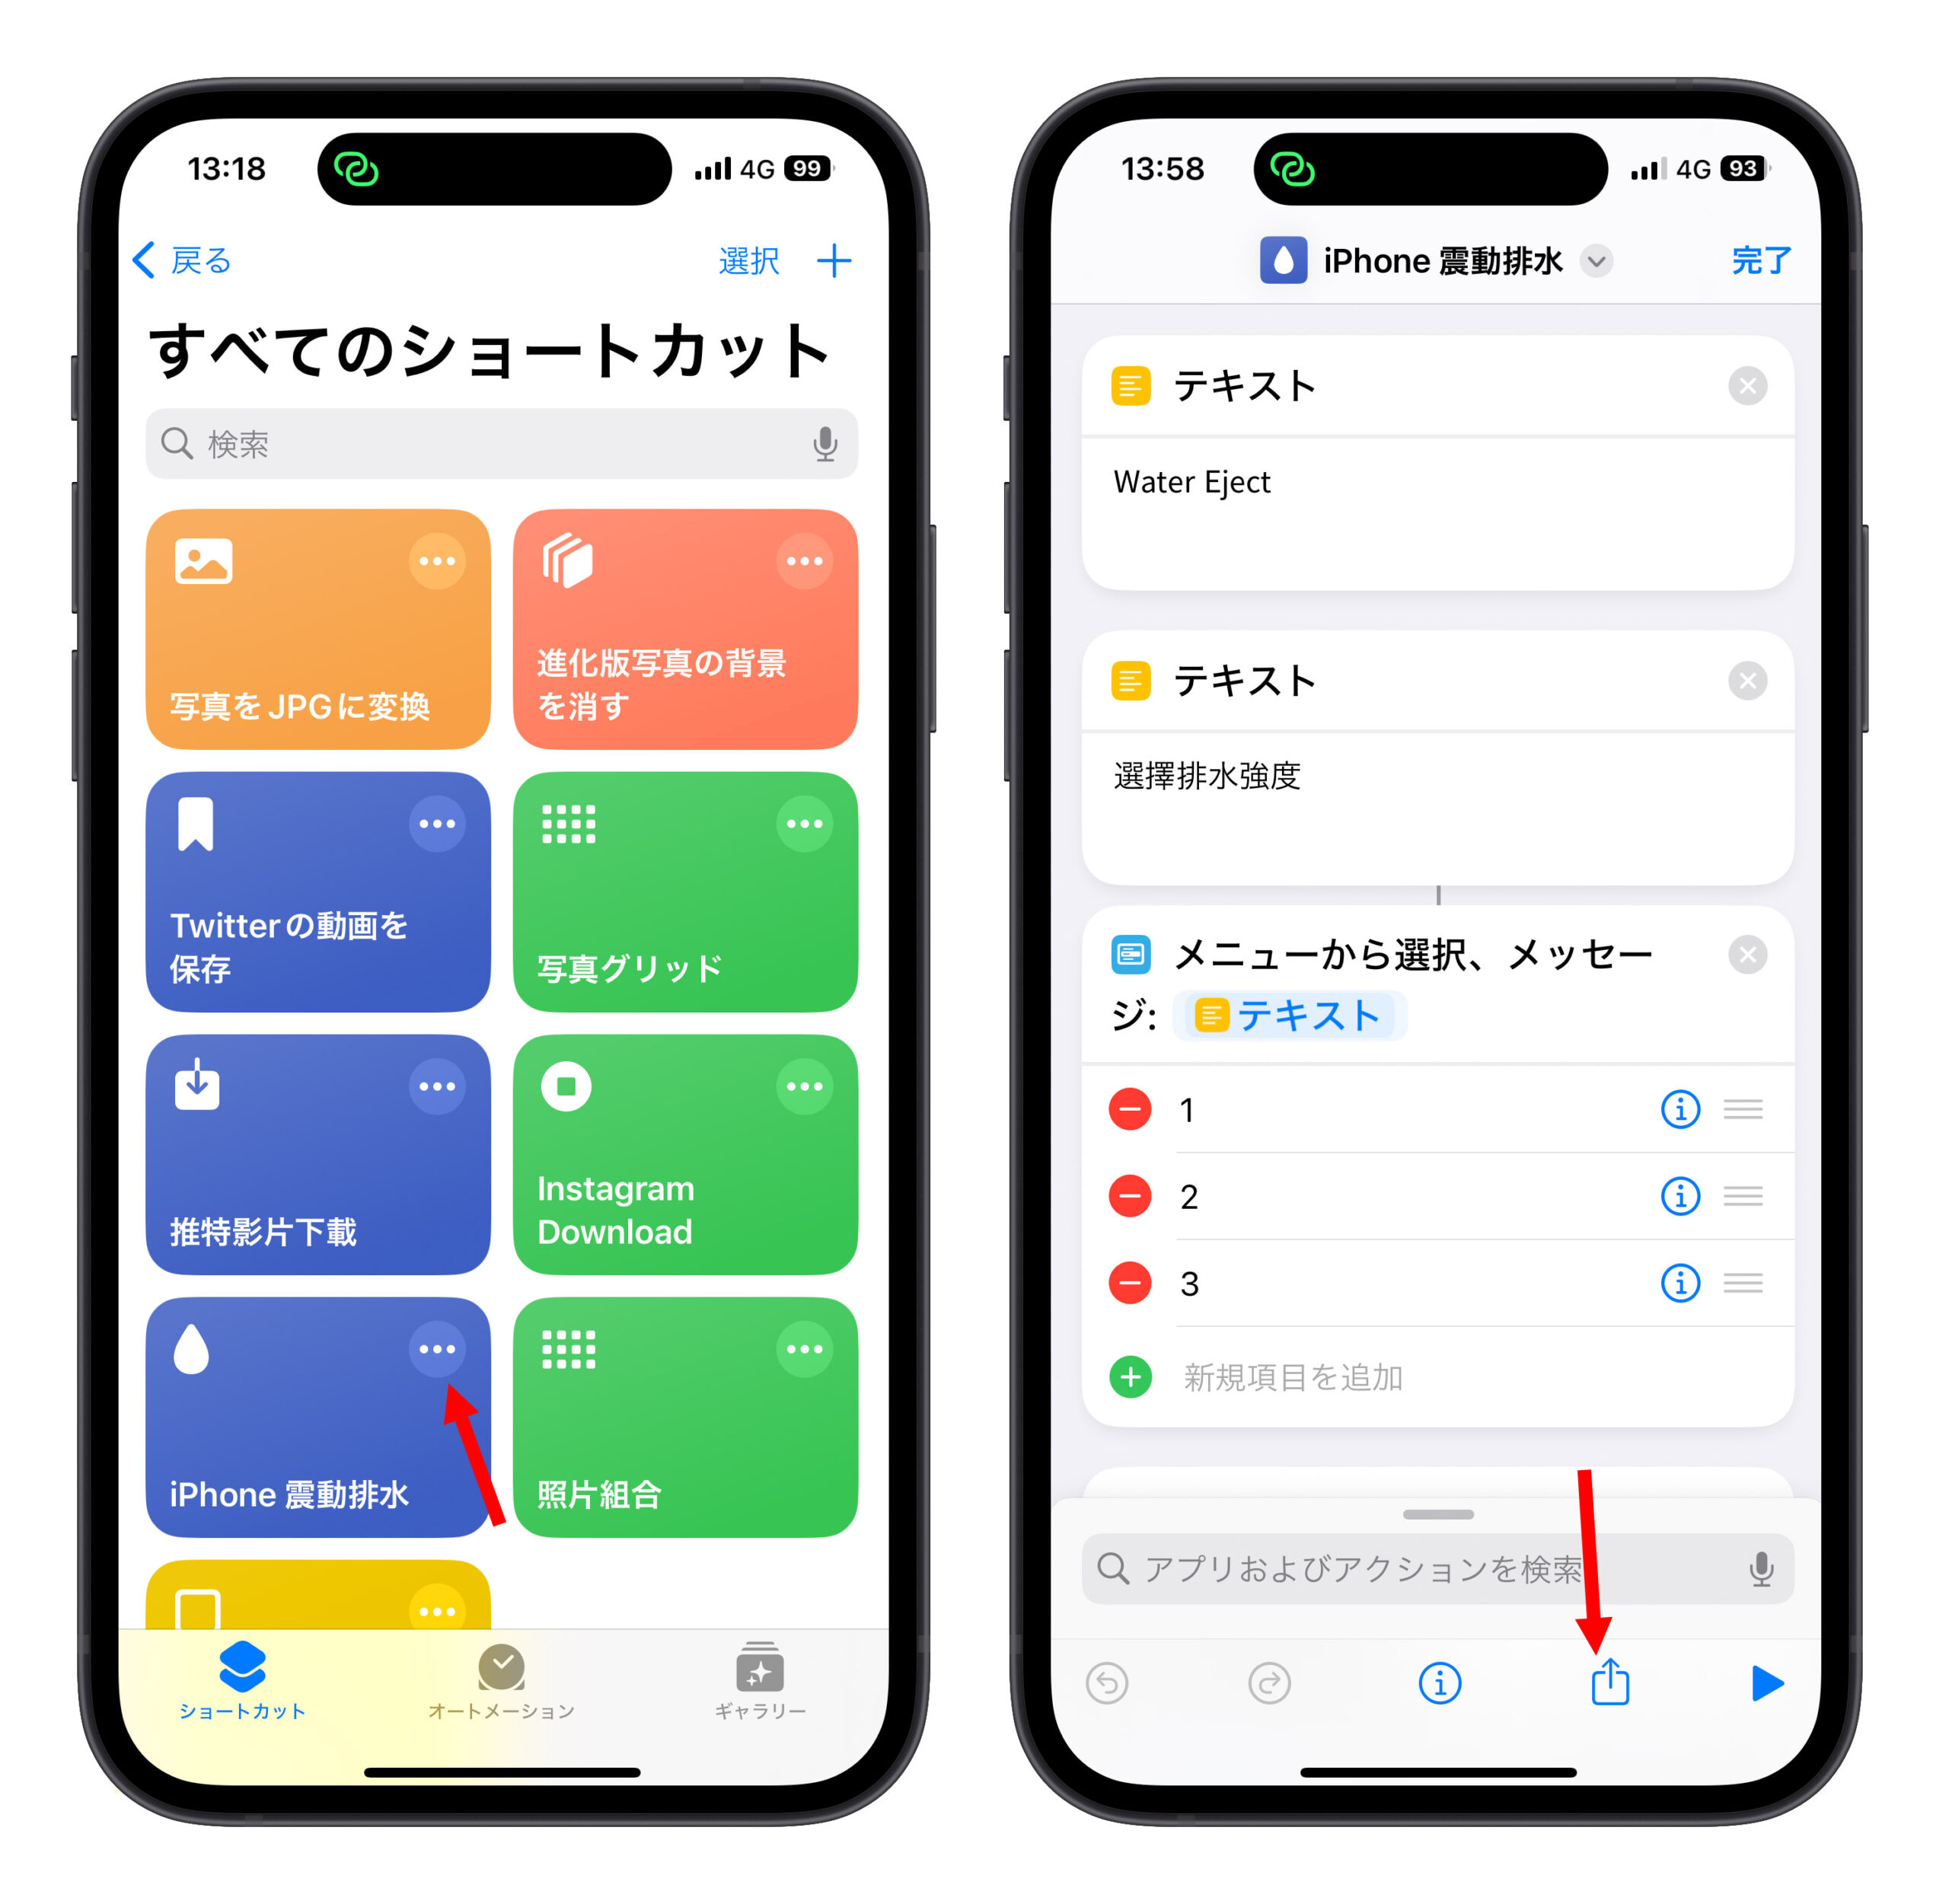 iPhone Water Eject 水抜き ショートカット